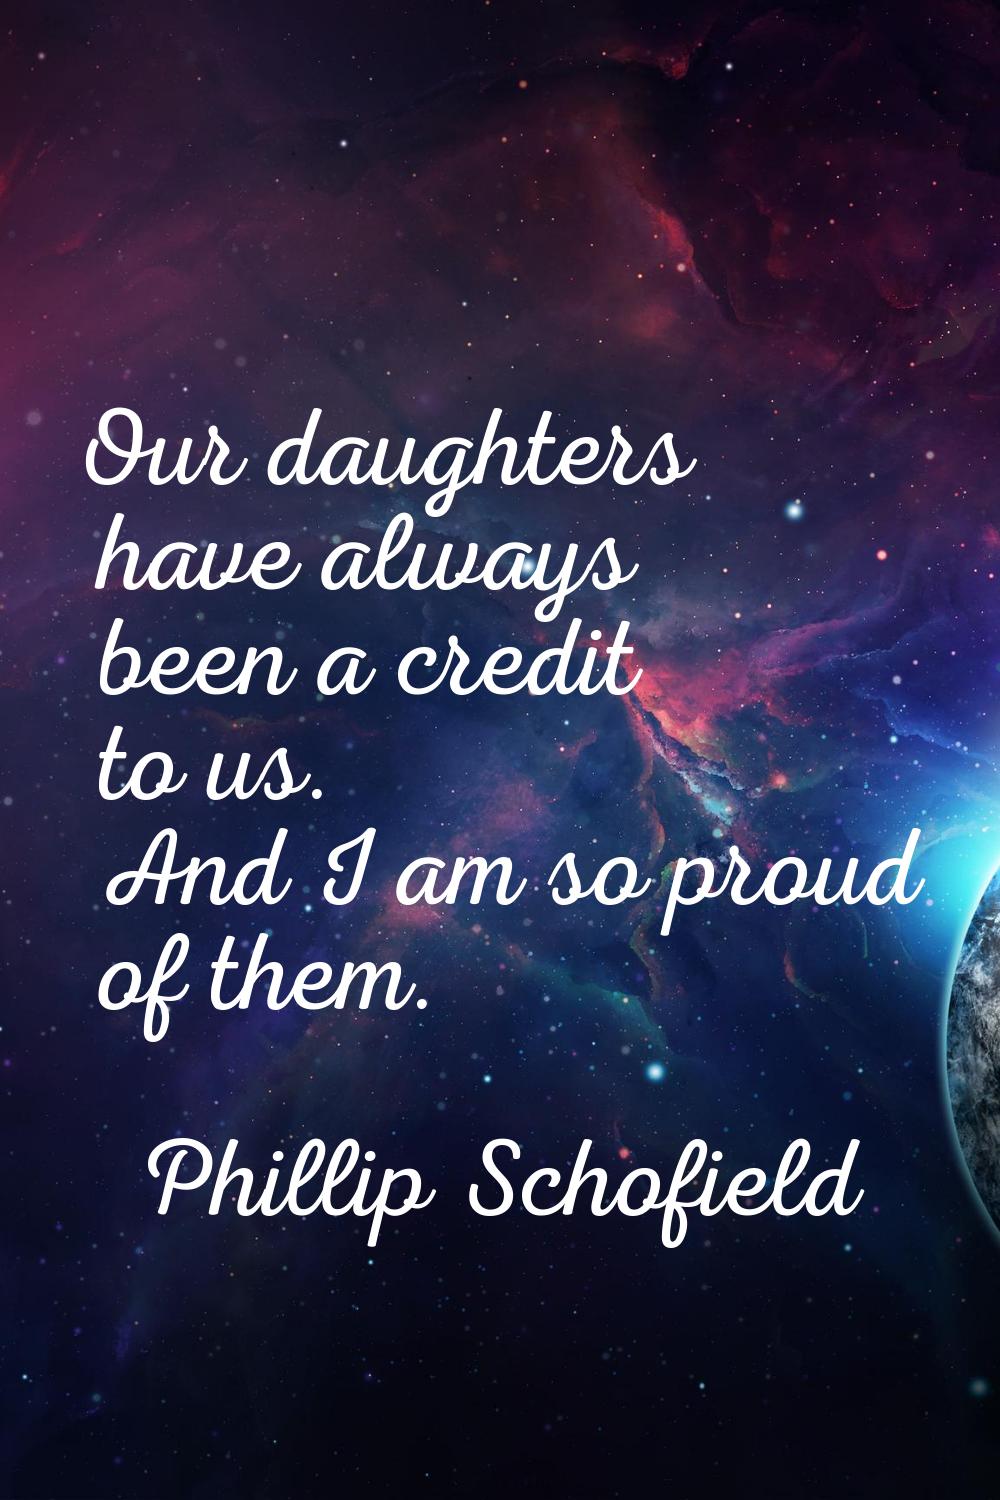 Our daughters have always been a credit to us. And I am so proud of them.